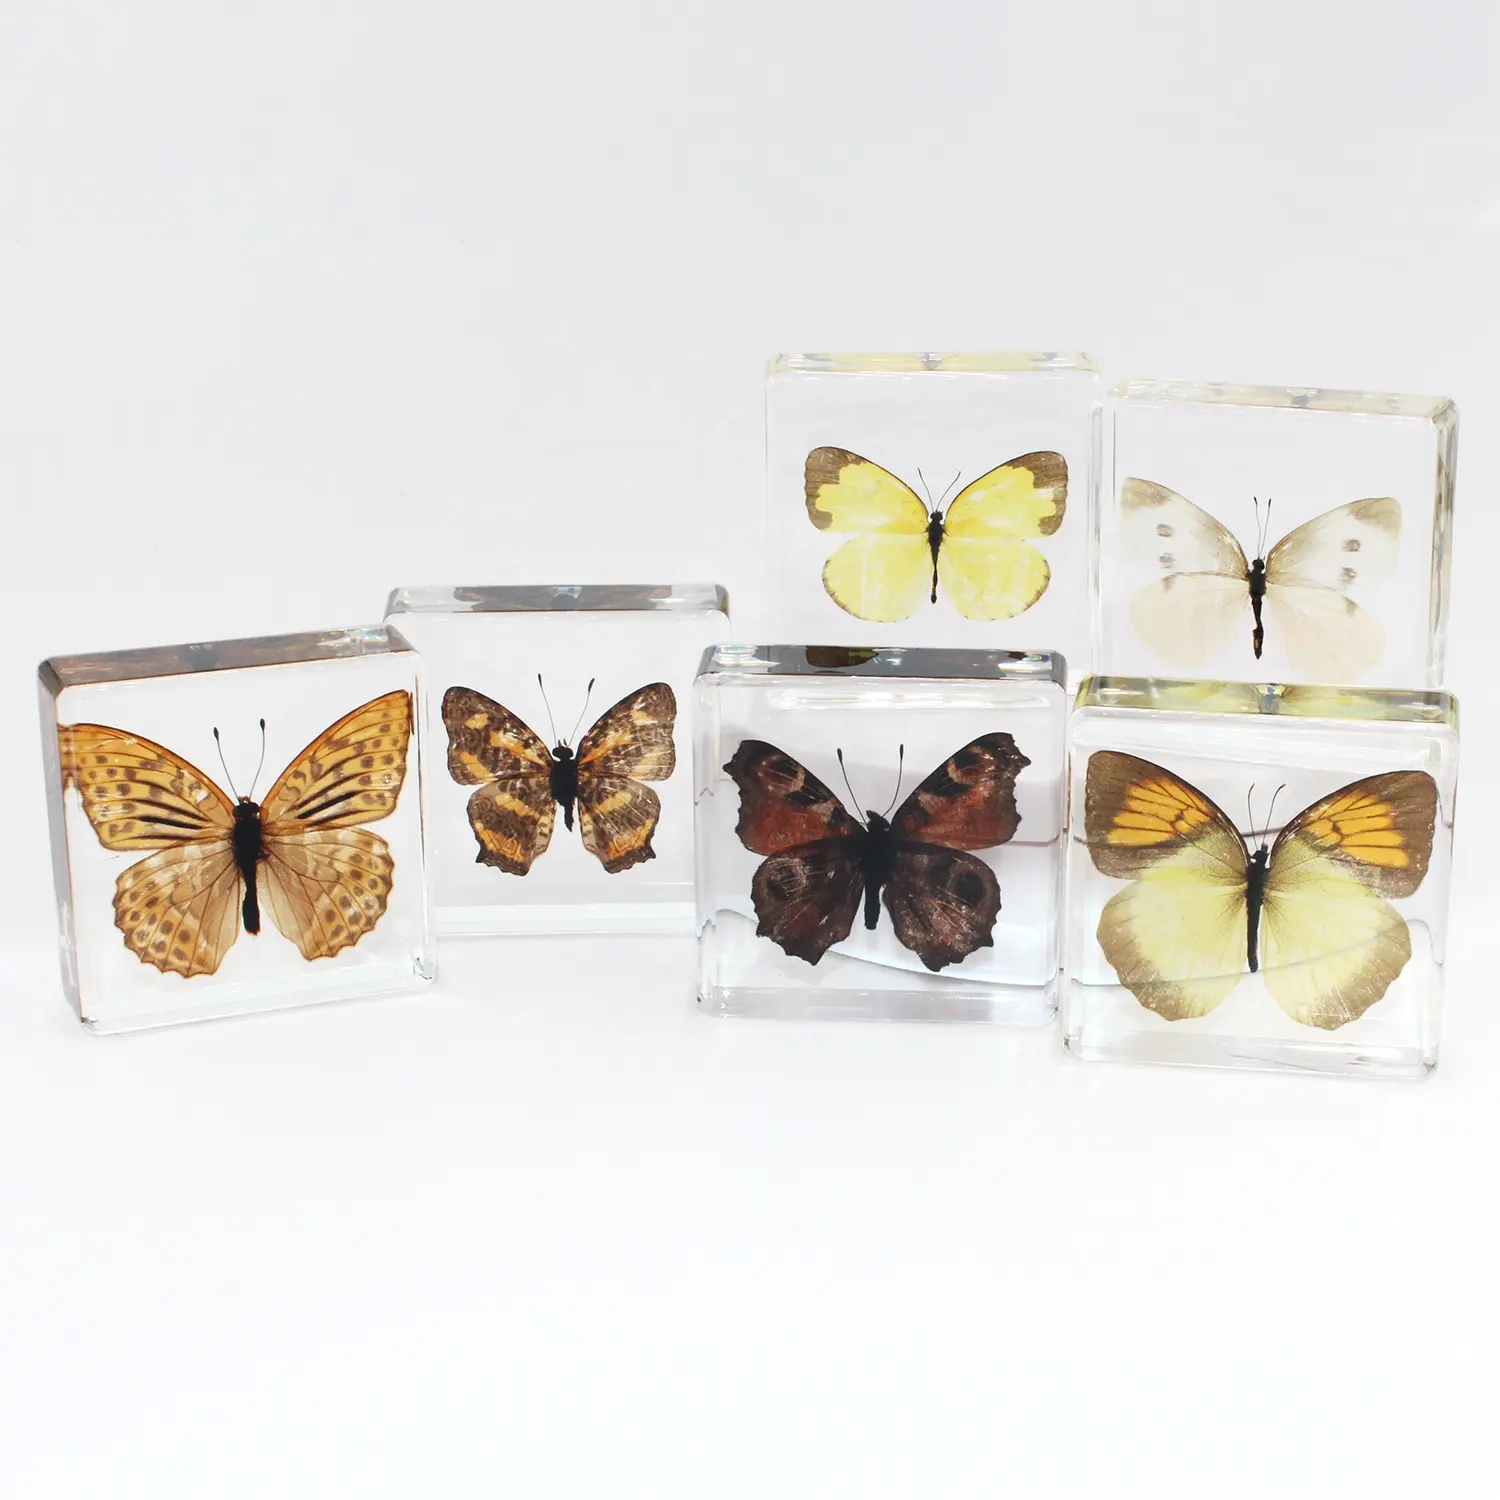 Special Real Butterfly Specimen Flying Insect Resin Block Promotional Business Educational Gifts